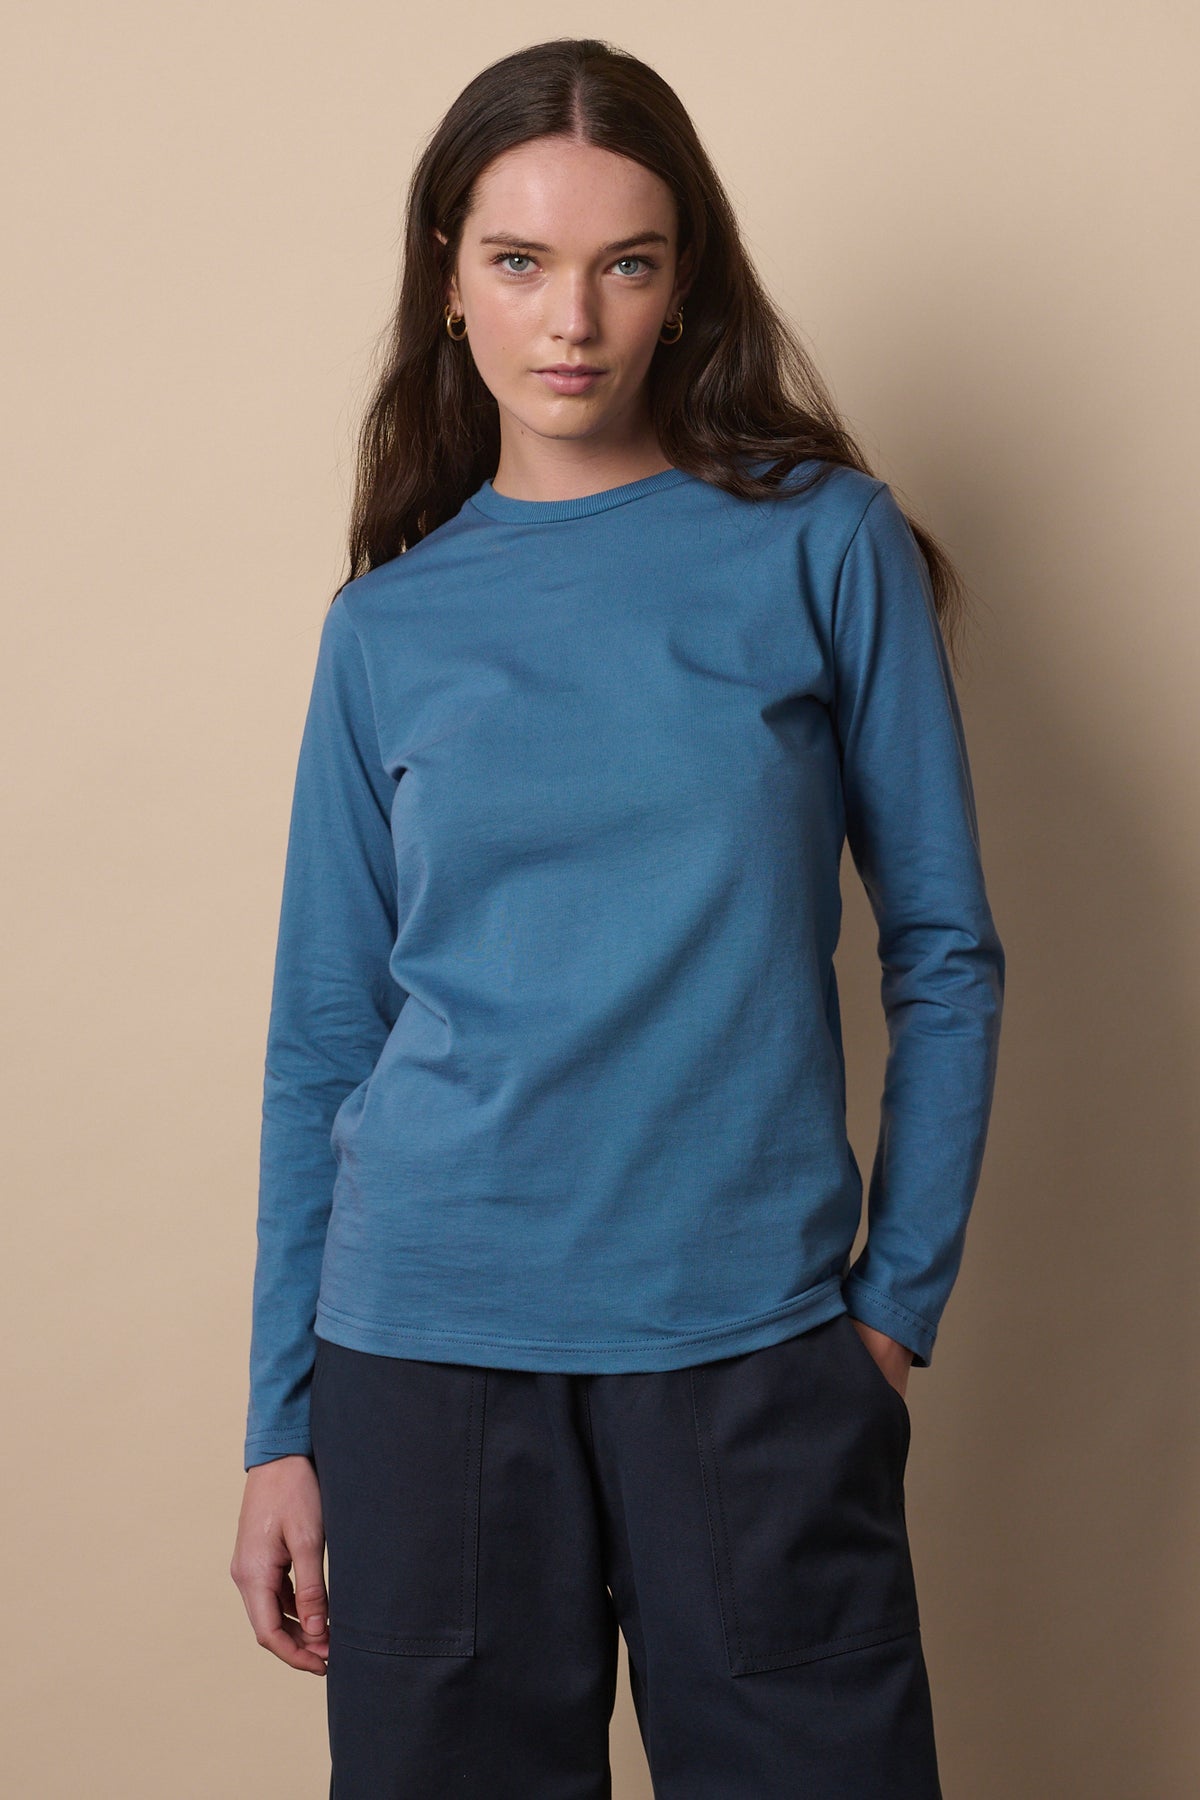 
            Thigh up image of female wearing long sleeve RAF blue t shirt